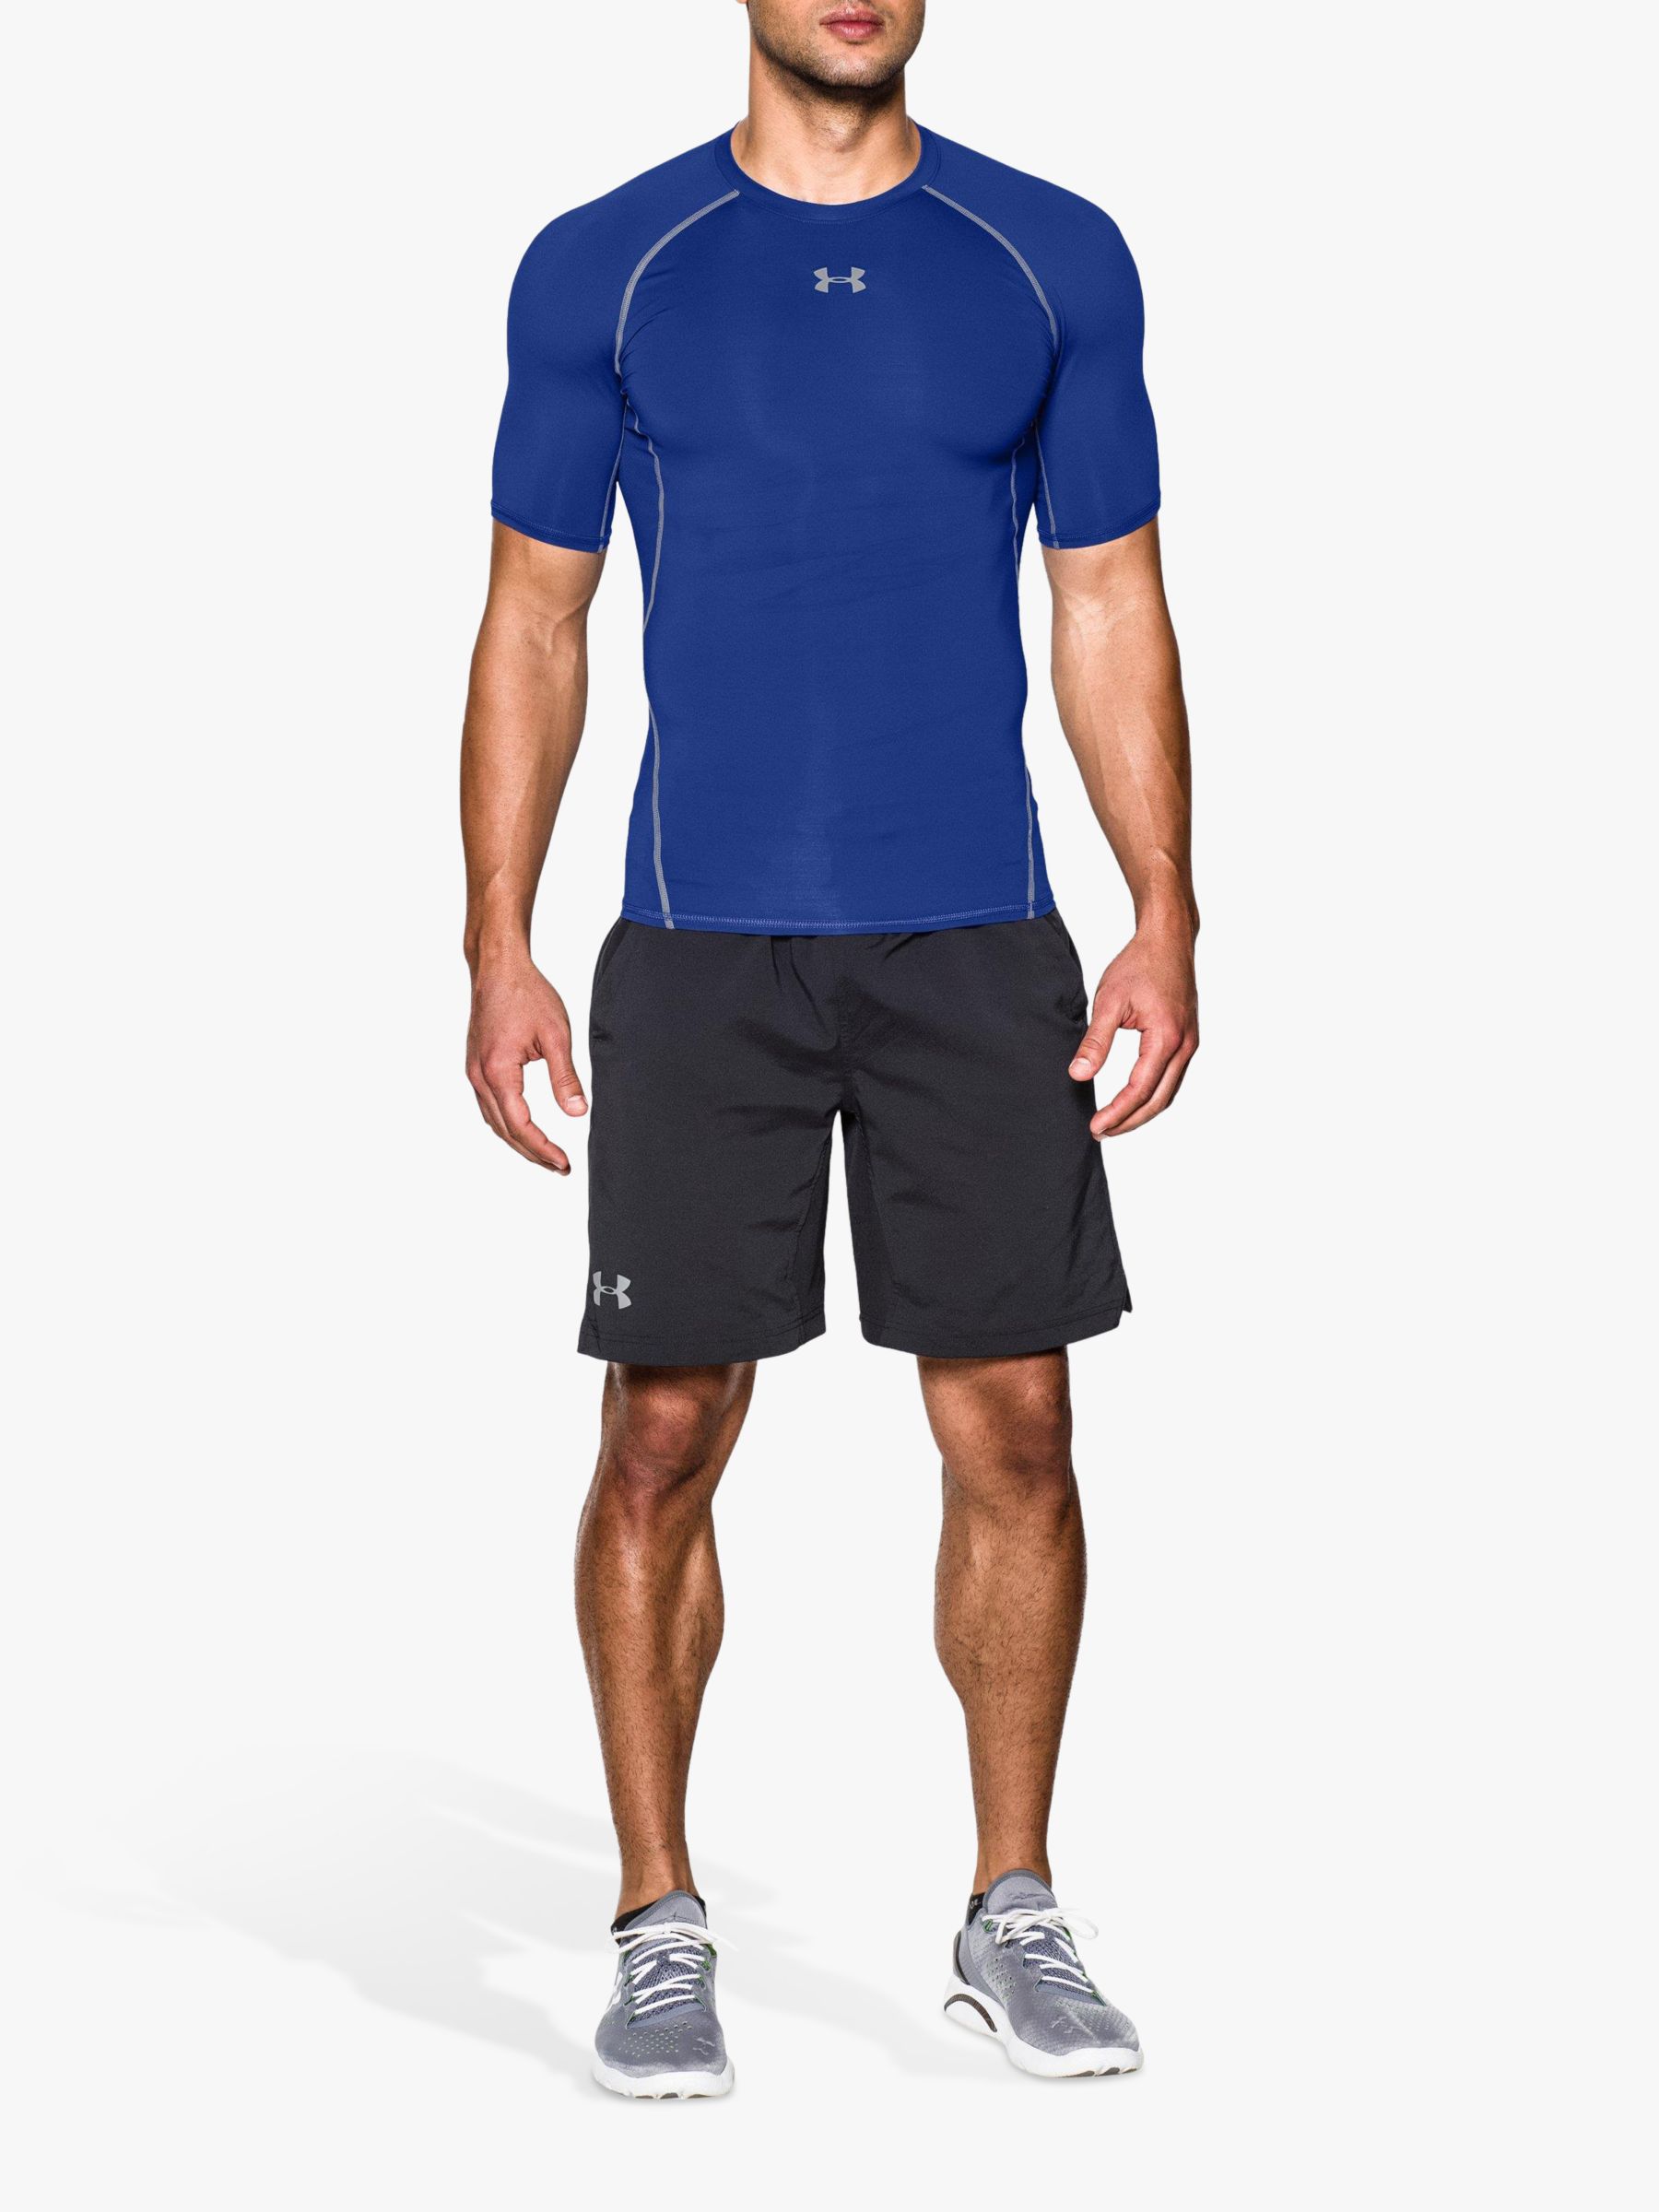 under armour compression top